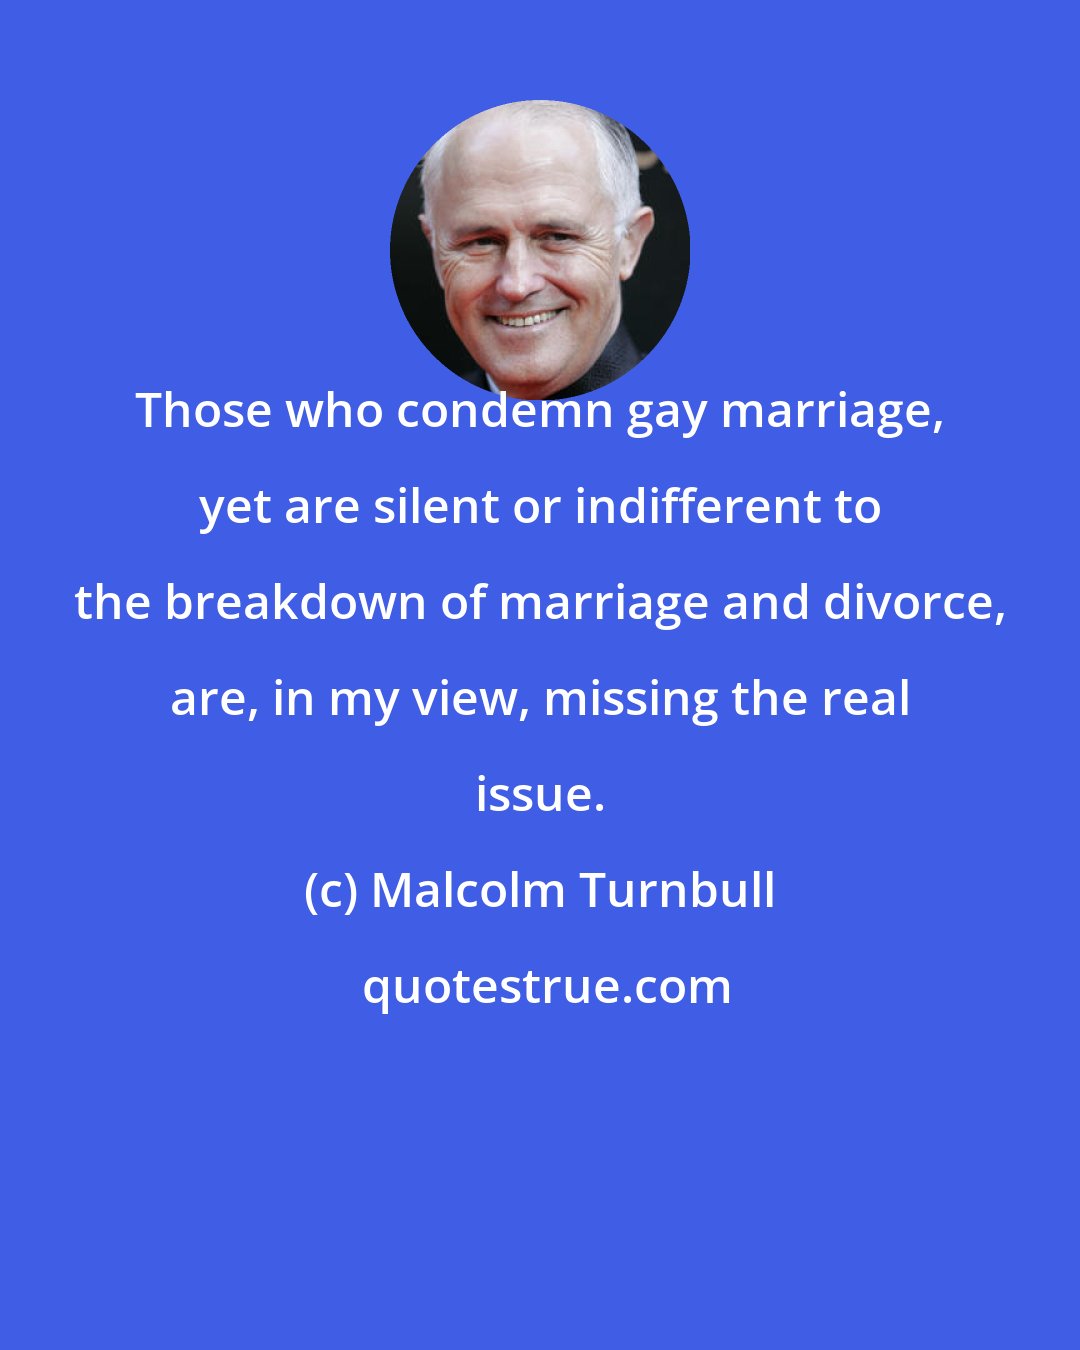 Malcolm Turnbull: Those who condemn gay marriage, yet are silent or indifferent to the breakdown of marriage and divorce, are, in my view, missing the real issue.